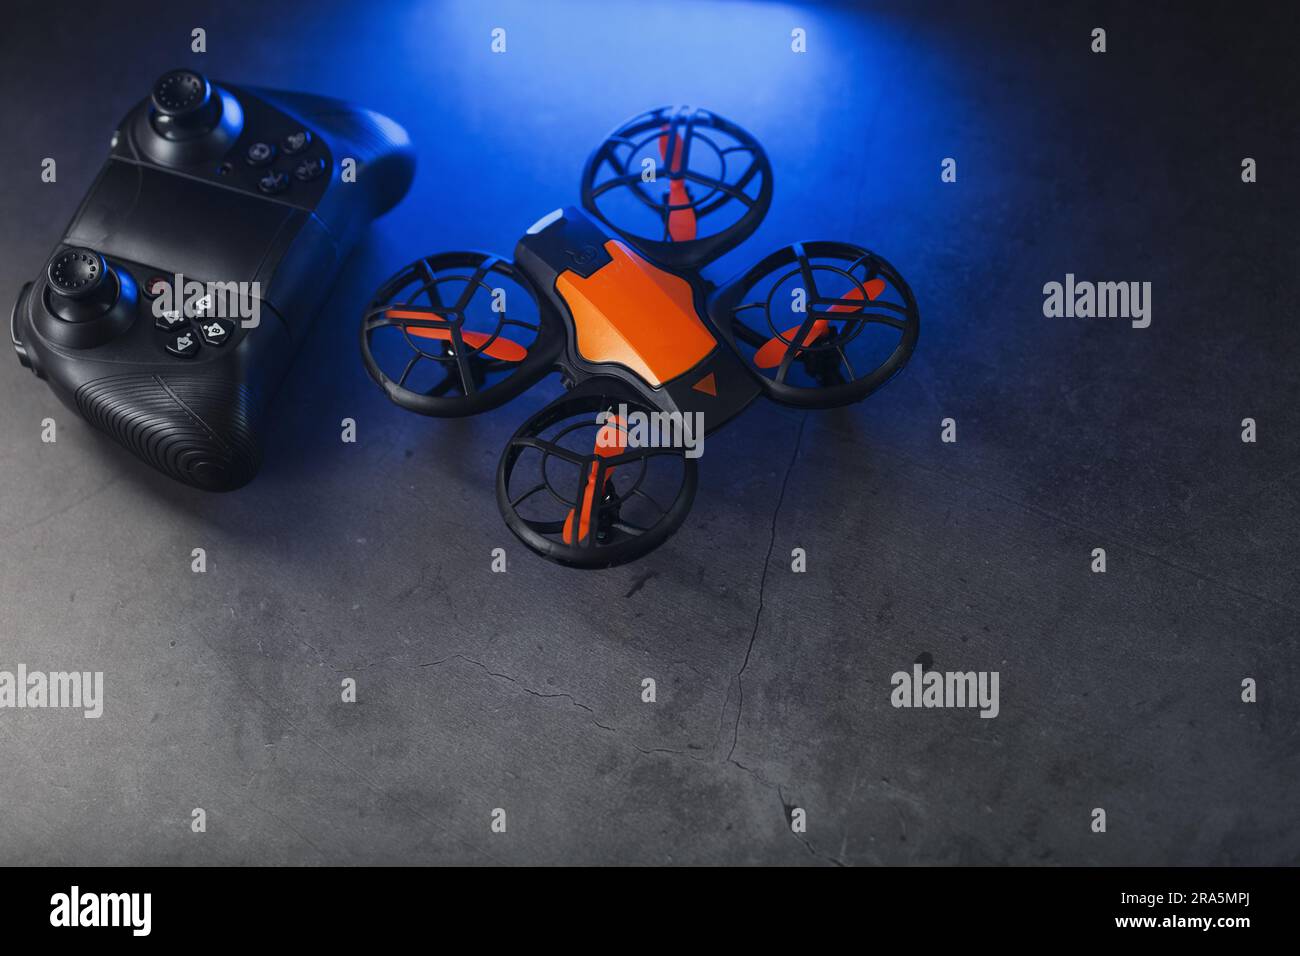 Quadcopter drone with joystick control and blue neon backlight, on a dark textured background Stock Photo